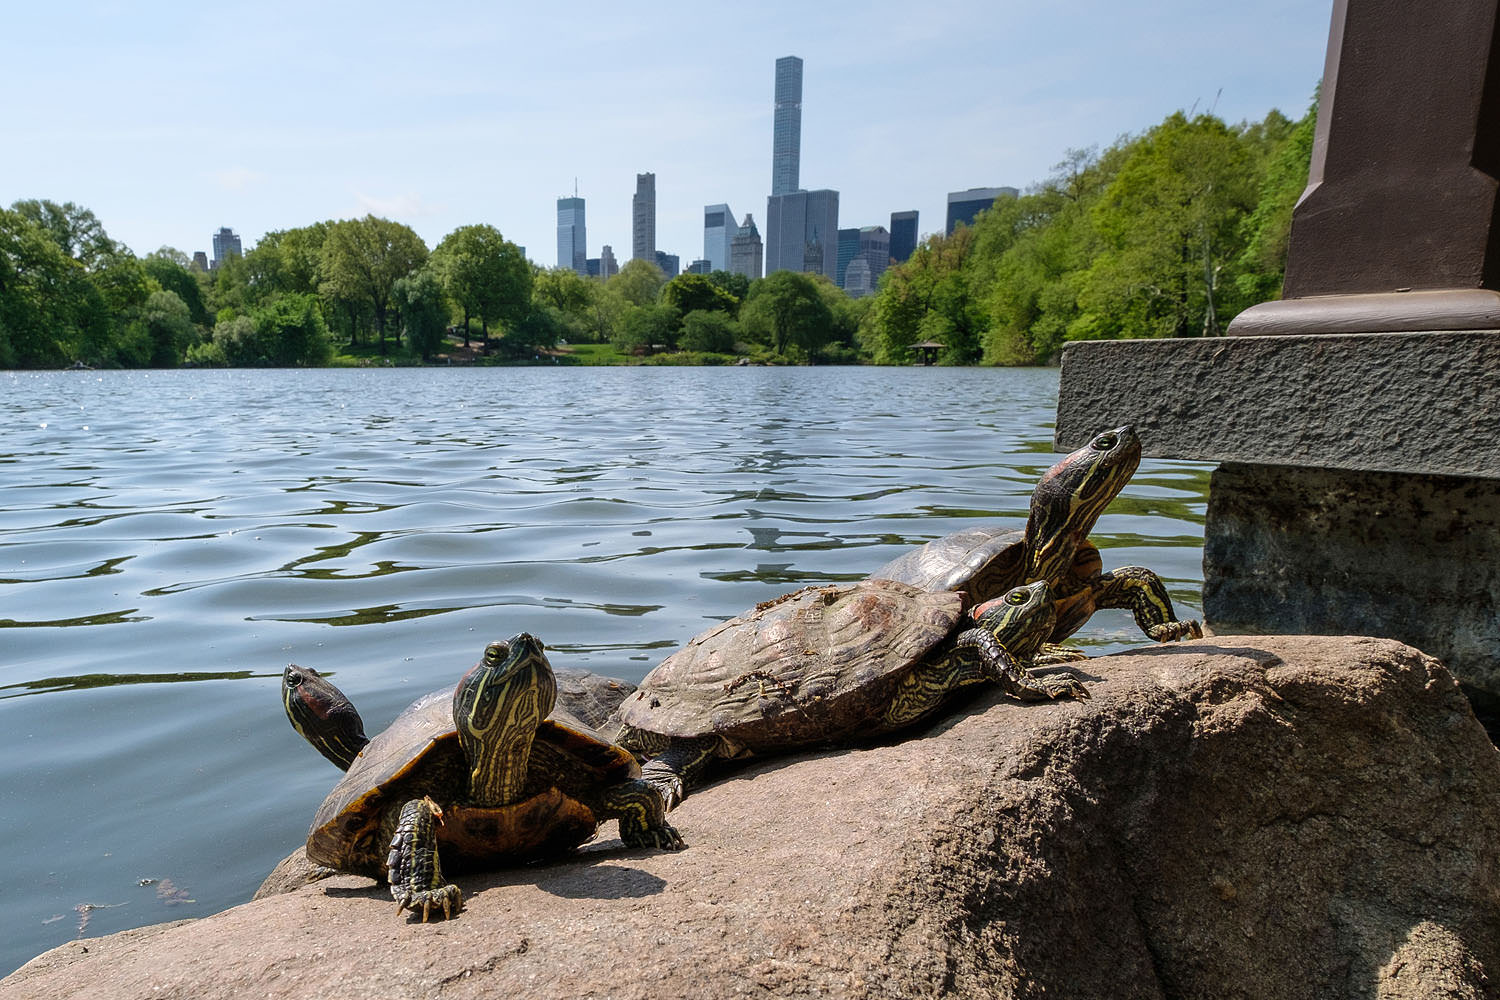 Turtles in Central Park